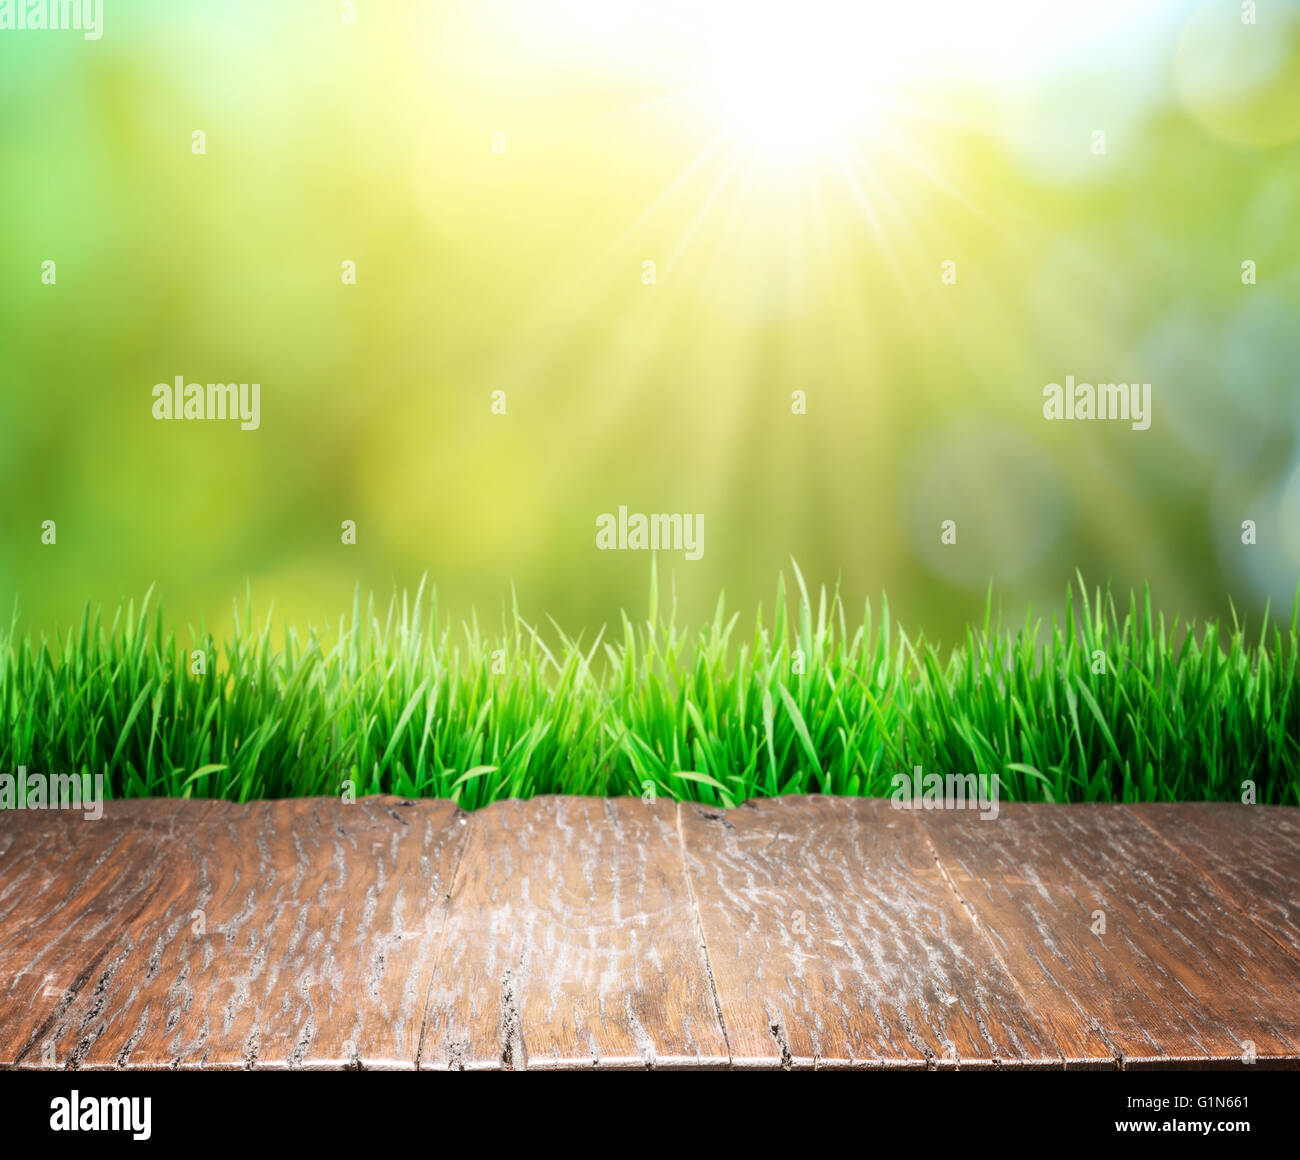 Old brown wooden floor with green grass on the edge. Nature background. Stock Photo